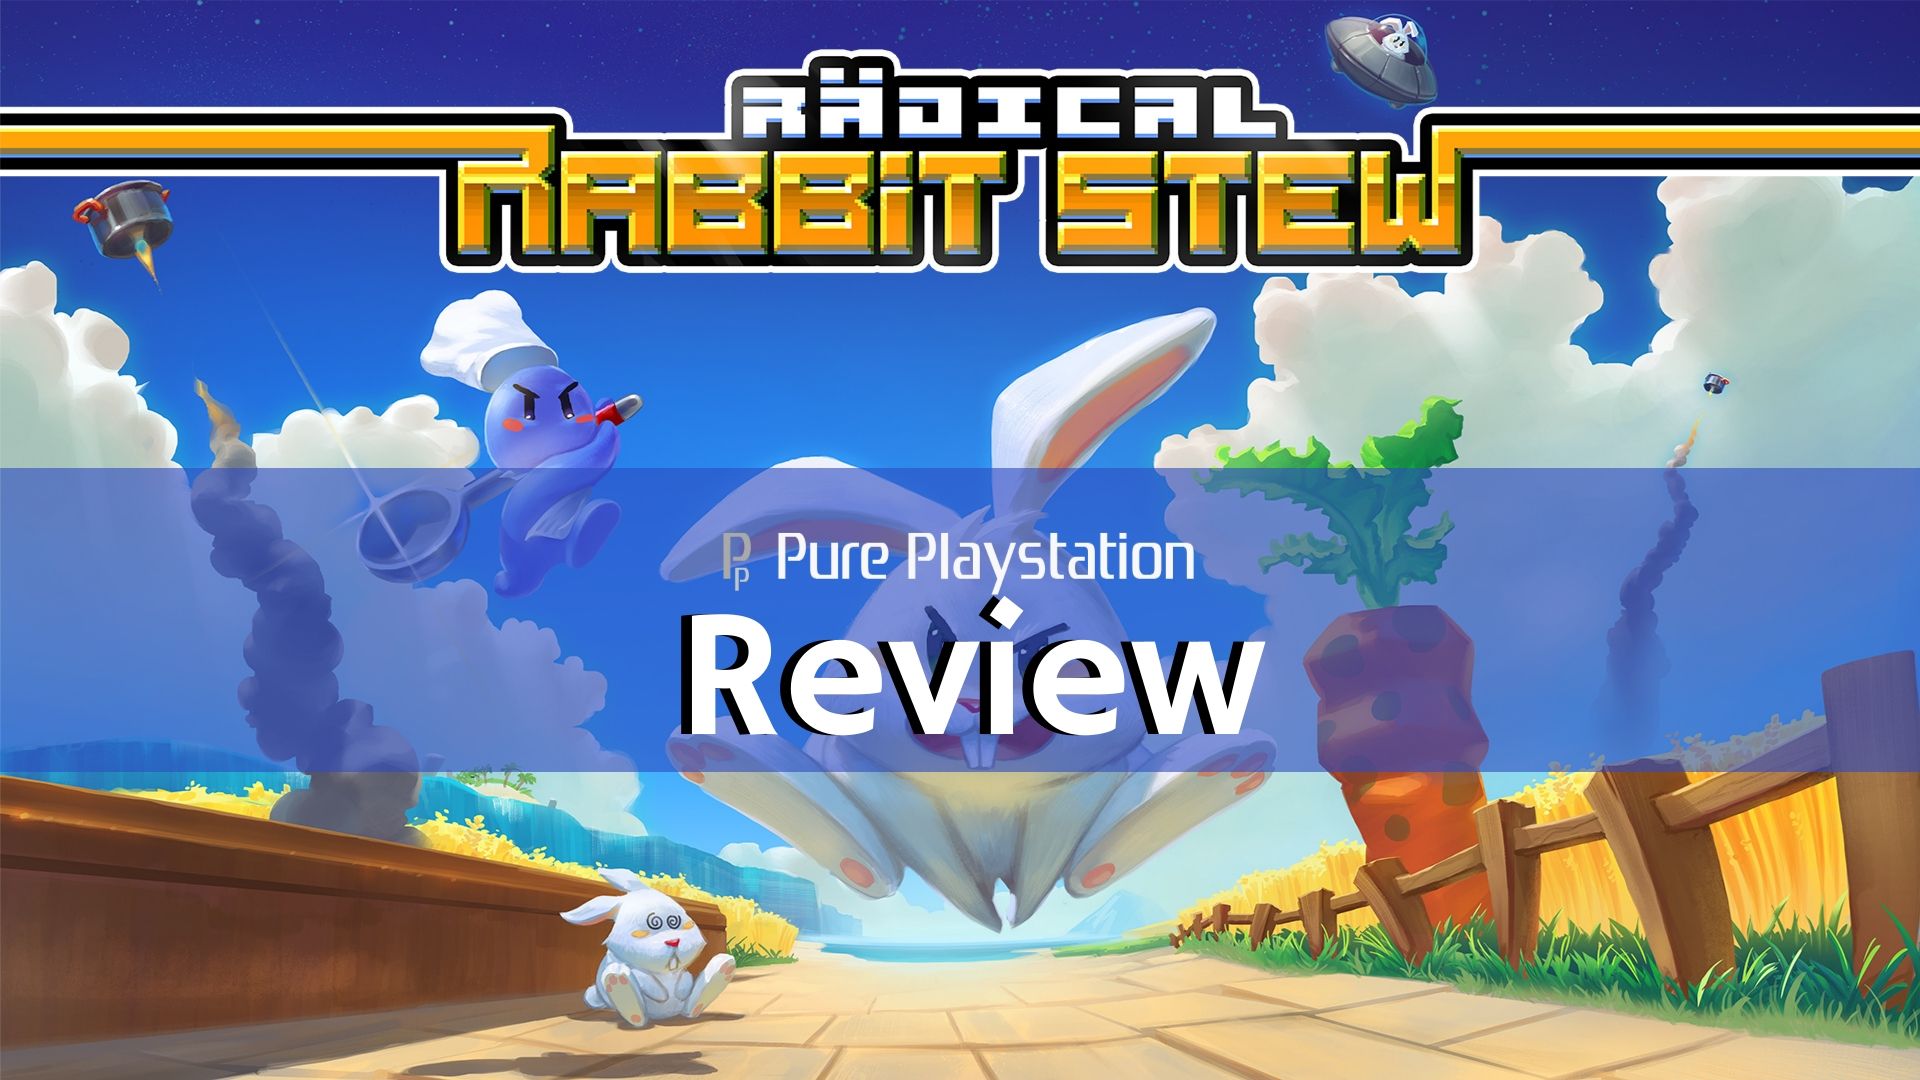 Review: Radical Rabbit Stew - PS4